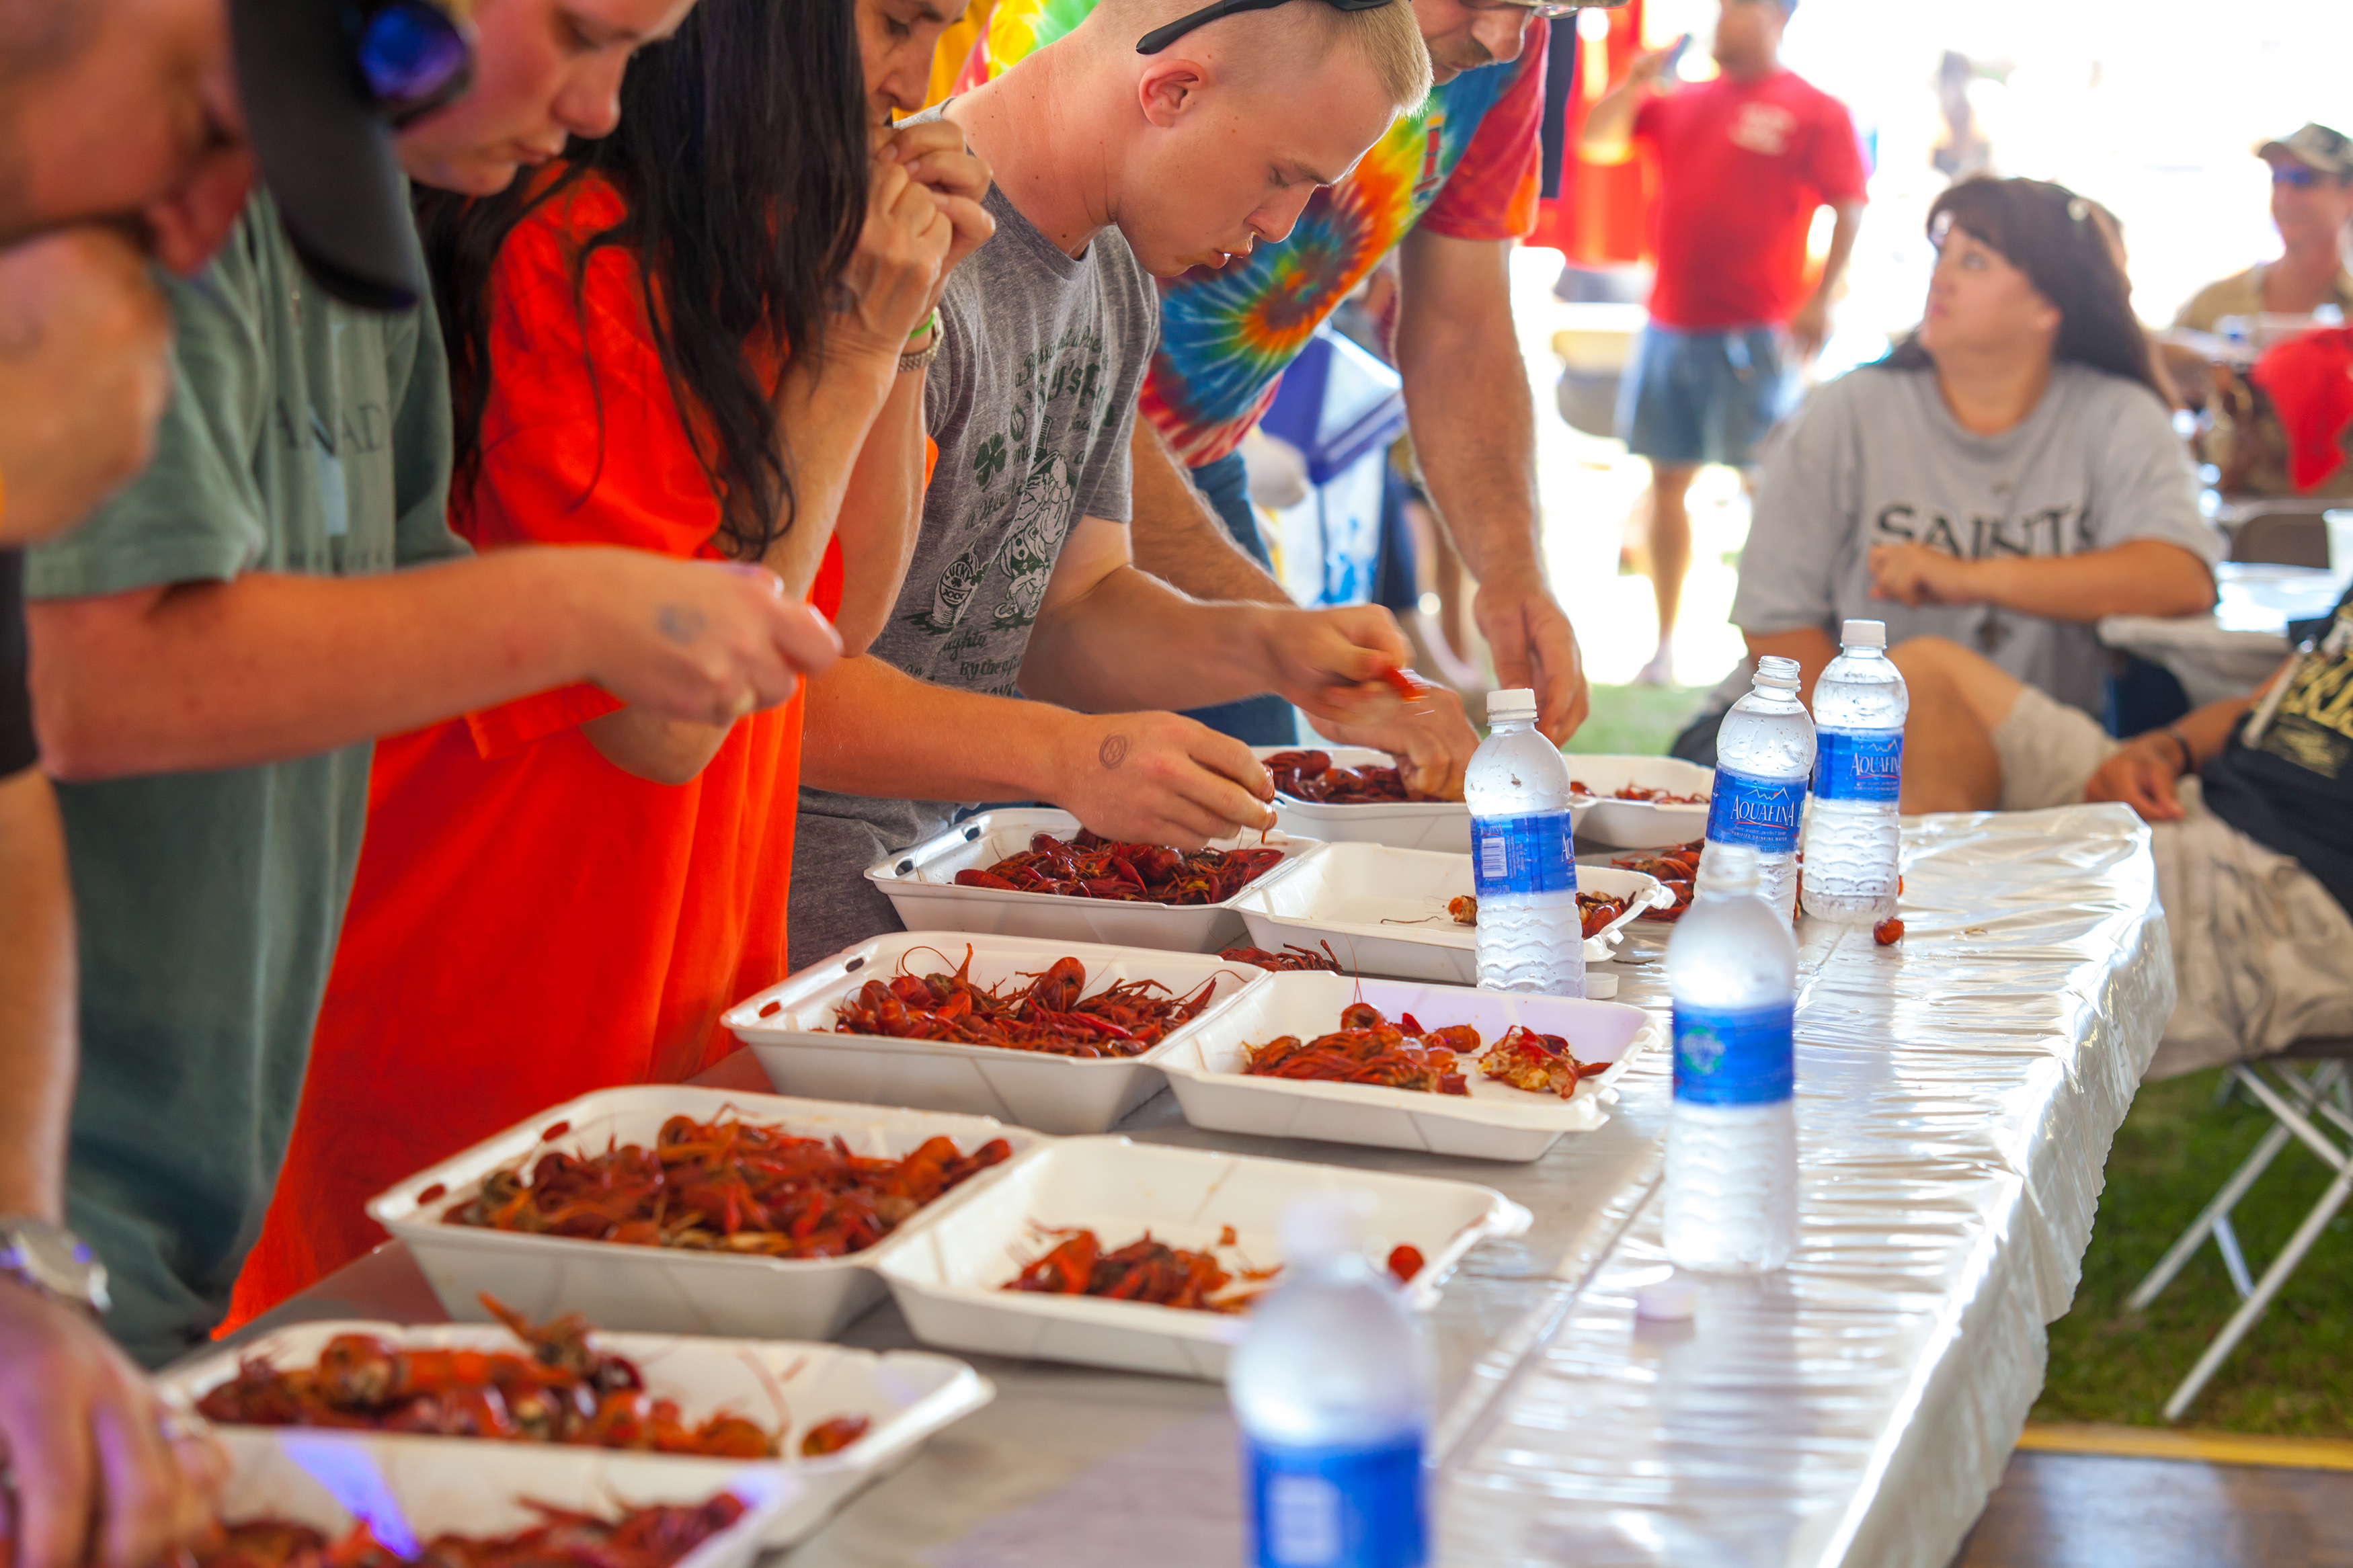 The Pensacola Crawfish Festival offers a wide range of Cajun fare such as crawfish po-boys, crawfish pies, crawfish etouffee and, of course, 16,000 pounds of boiled crawfish.